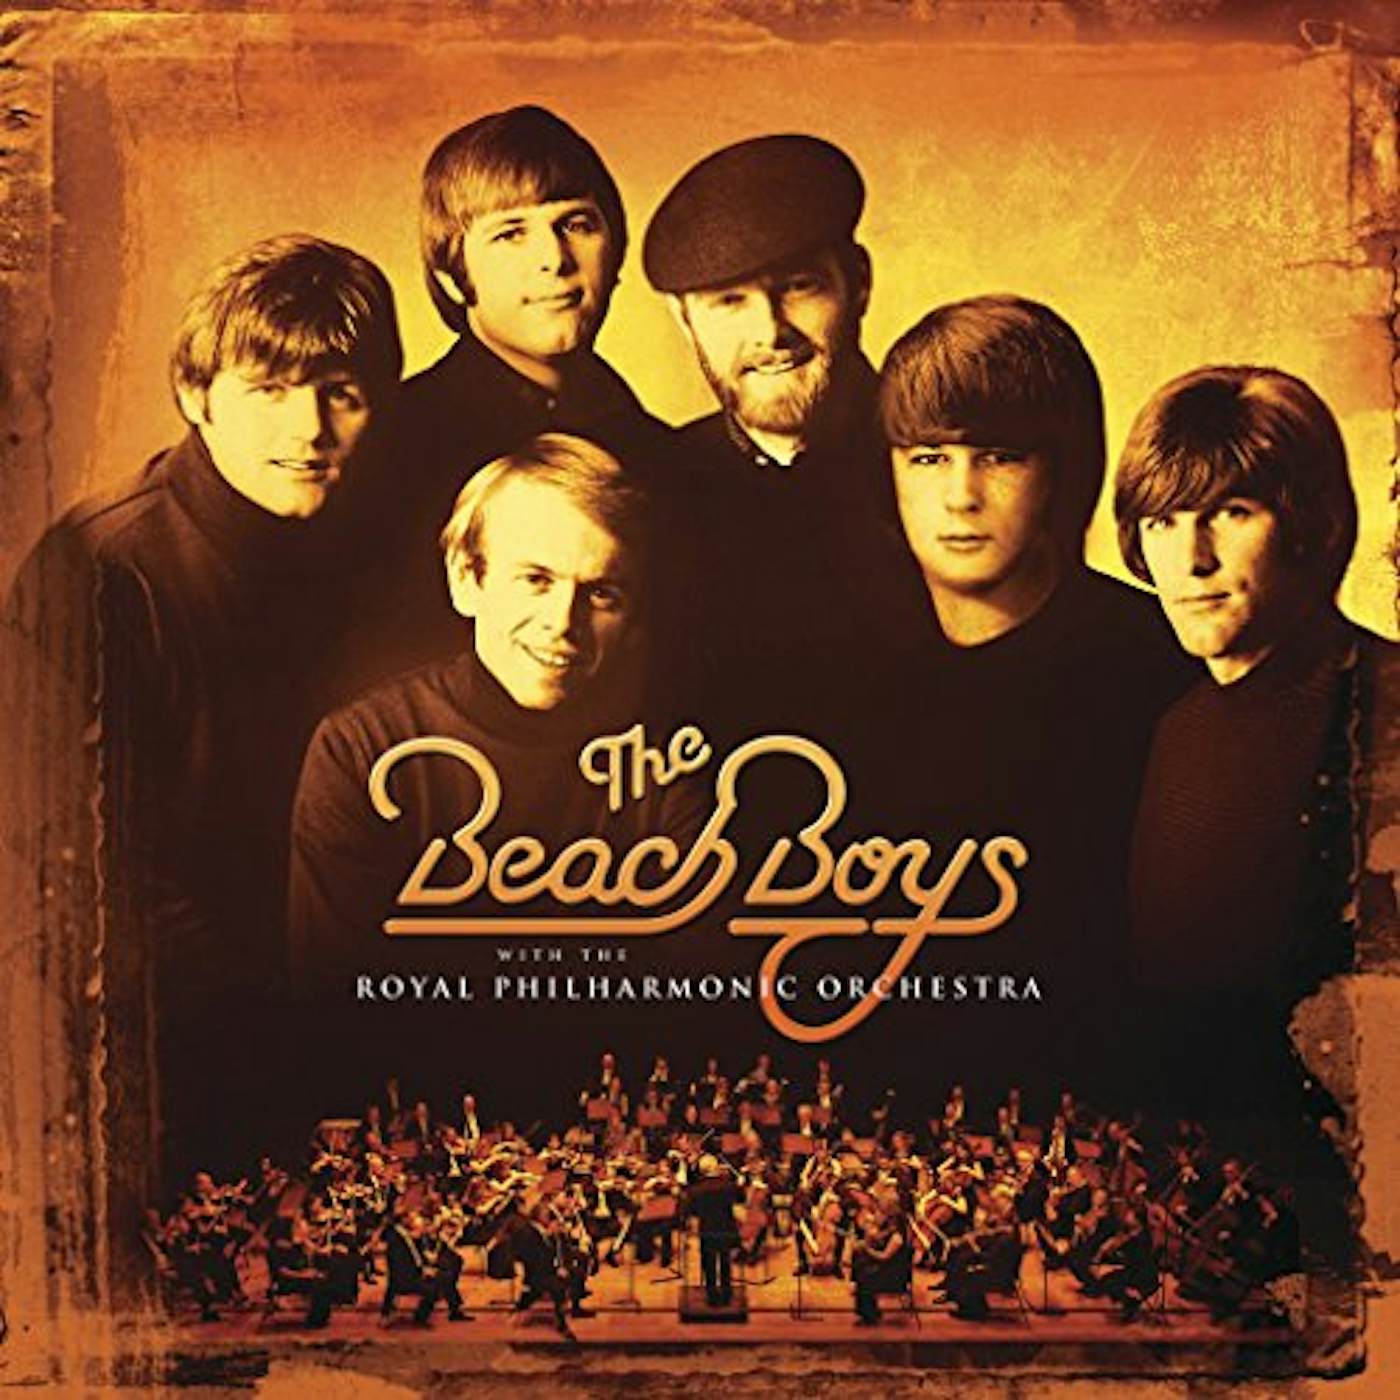 The Beach Boys WITH THE ROYAL PHILHARMONIC ORCHESTRA Vinyl Record